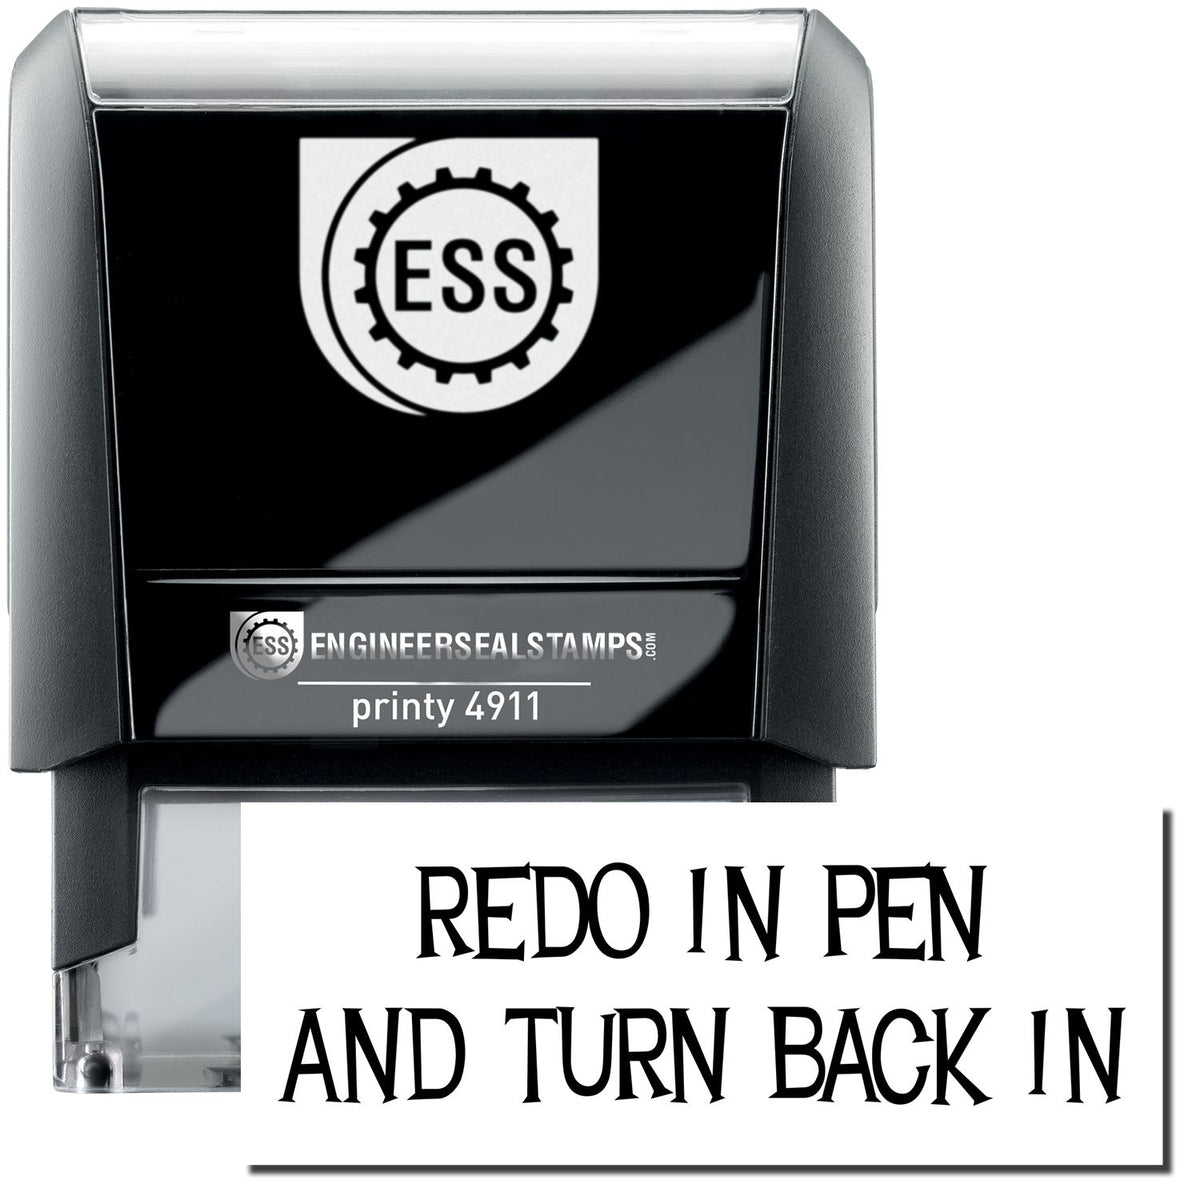 A self-inking stamp with a stamped image showing how the text &quot;REDO IN PEN AND TURN BACK IN&quot; is displayed after stamping.